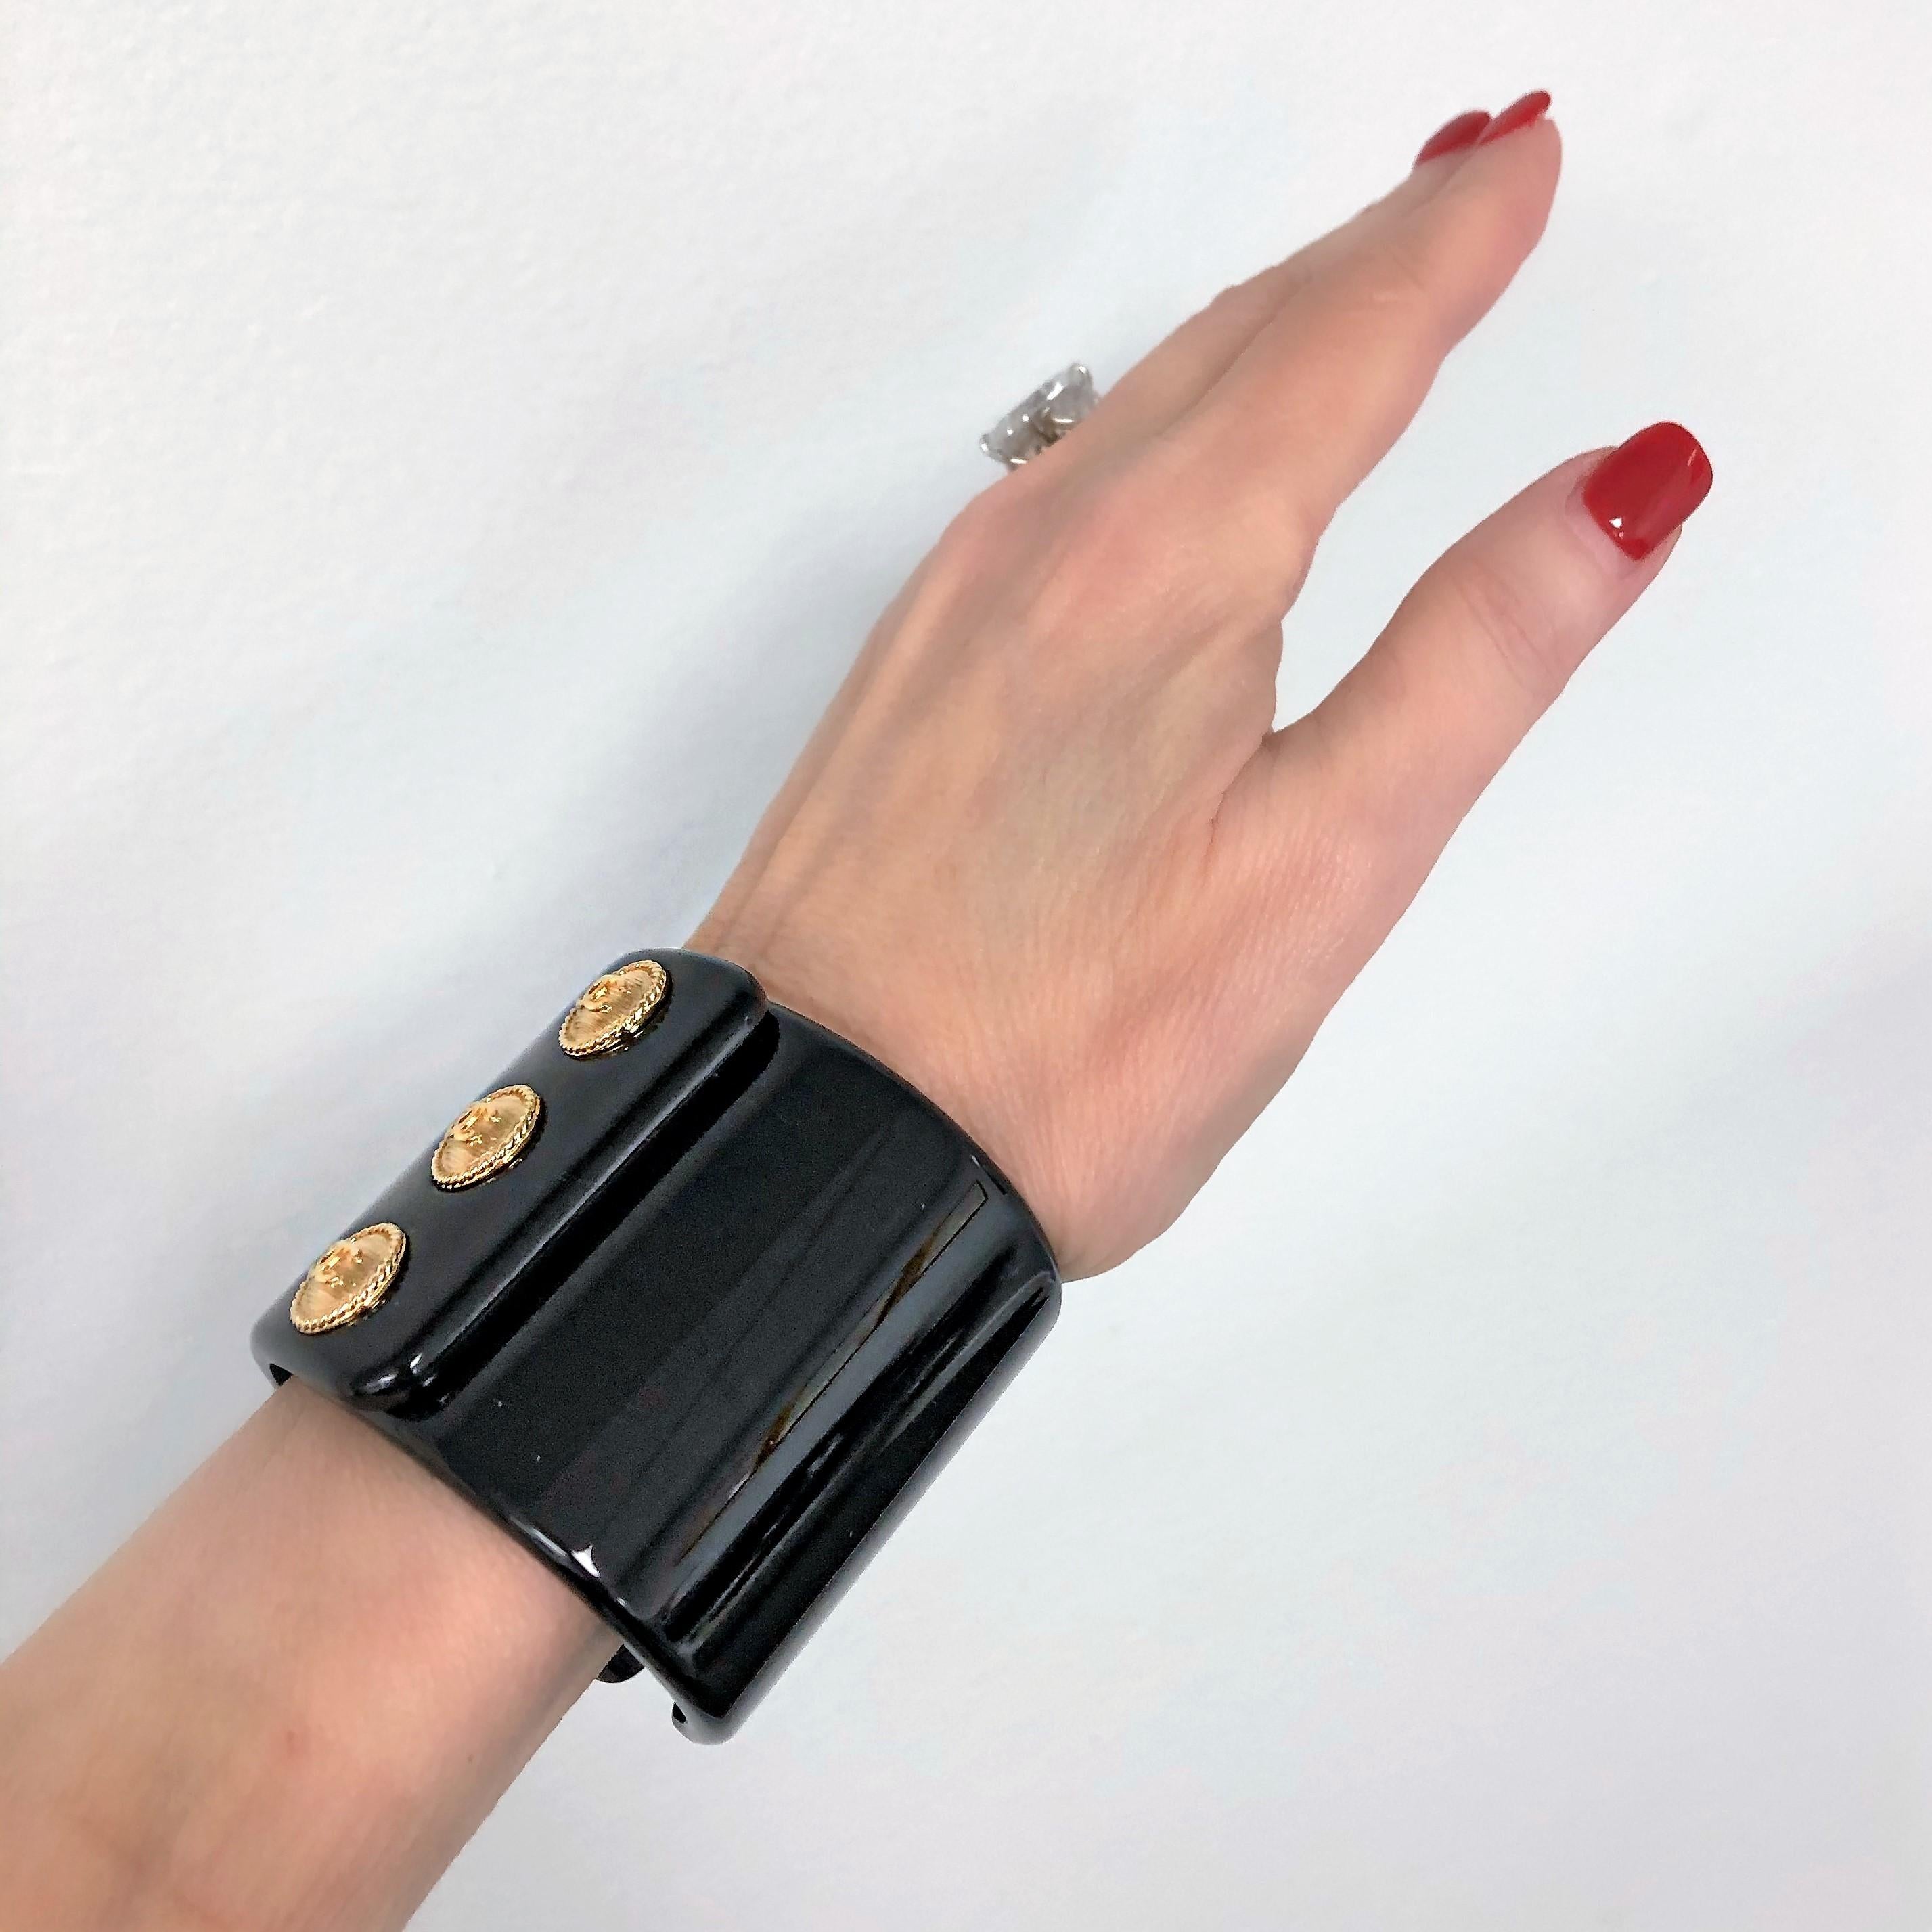 Chanel Black Resin 3 Button Cuff Bracelet 2018 Fall Collection For Sale 7